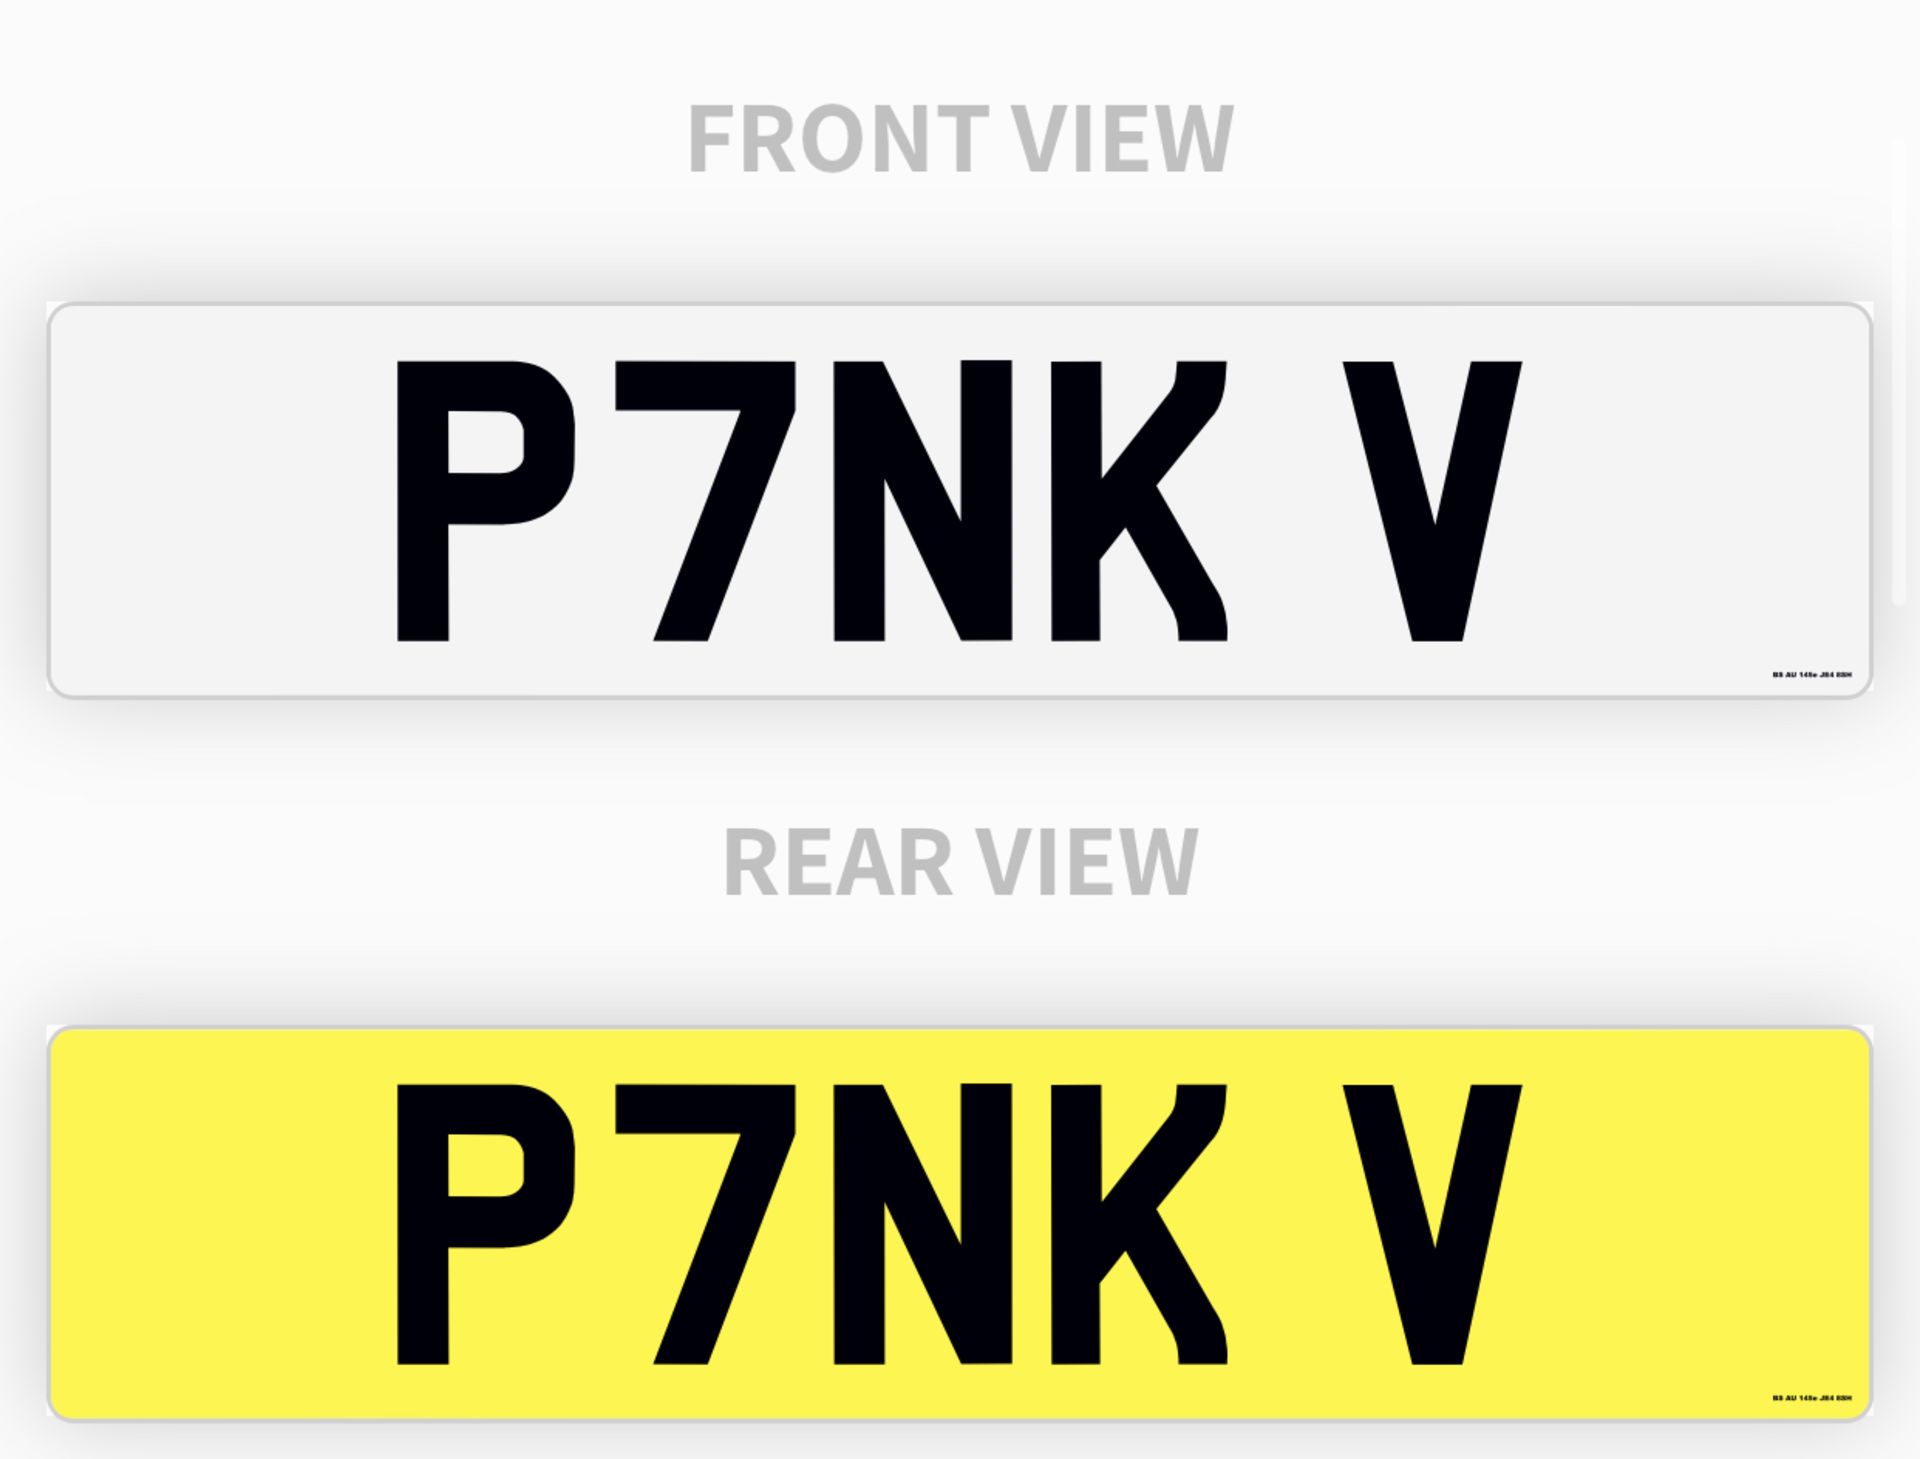 "P7NK V", 'PINK', PRIVATE NUMBER PLATE, CURRENTLY ON RETENTION *NO VAT* - Image 2 of 2